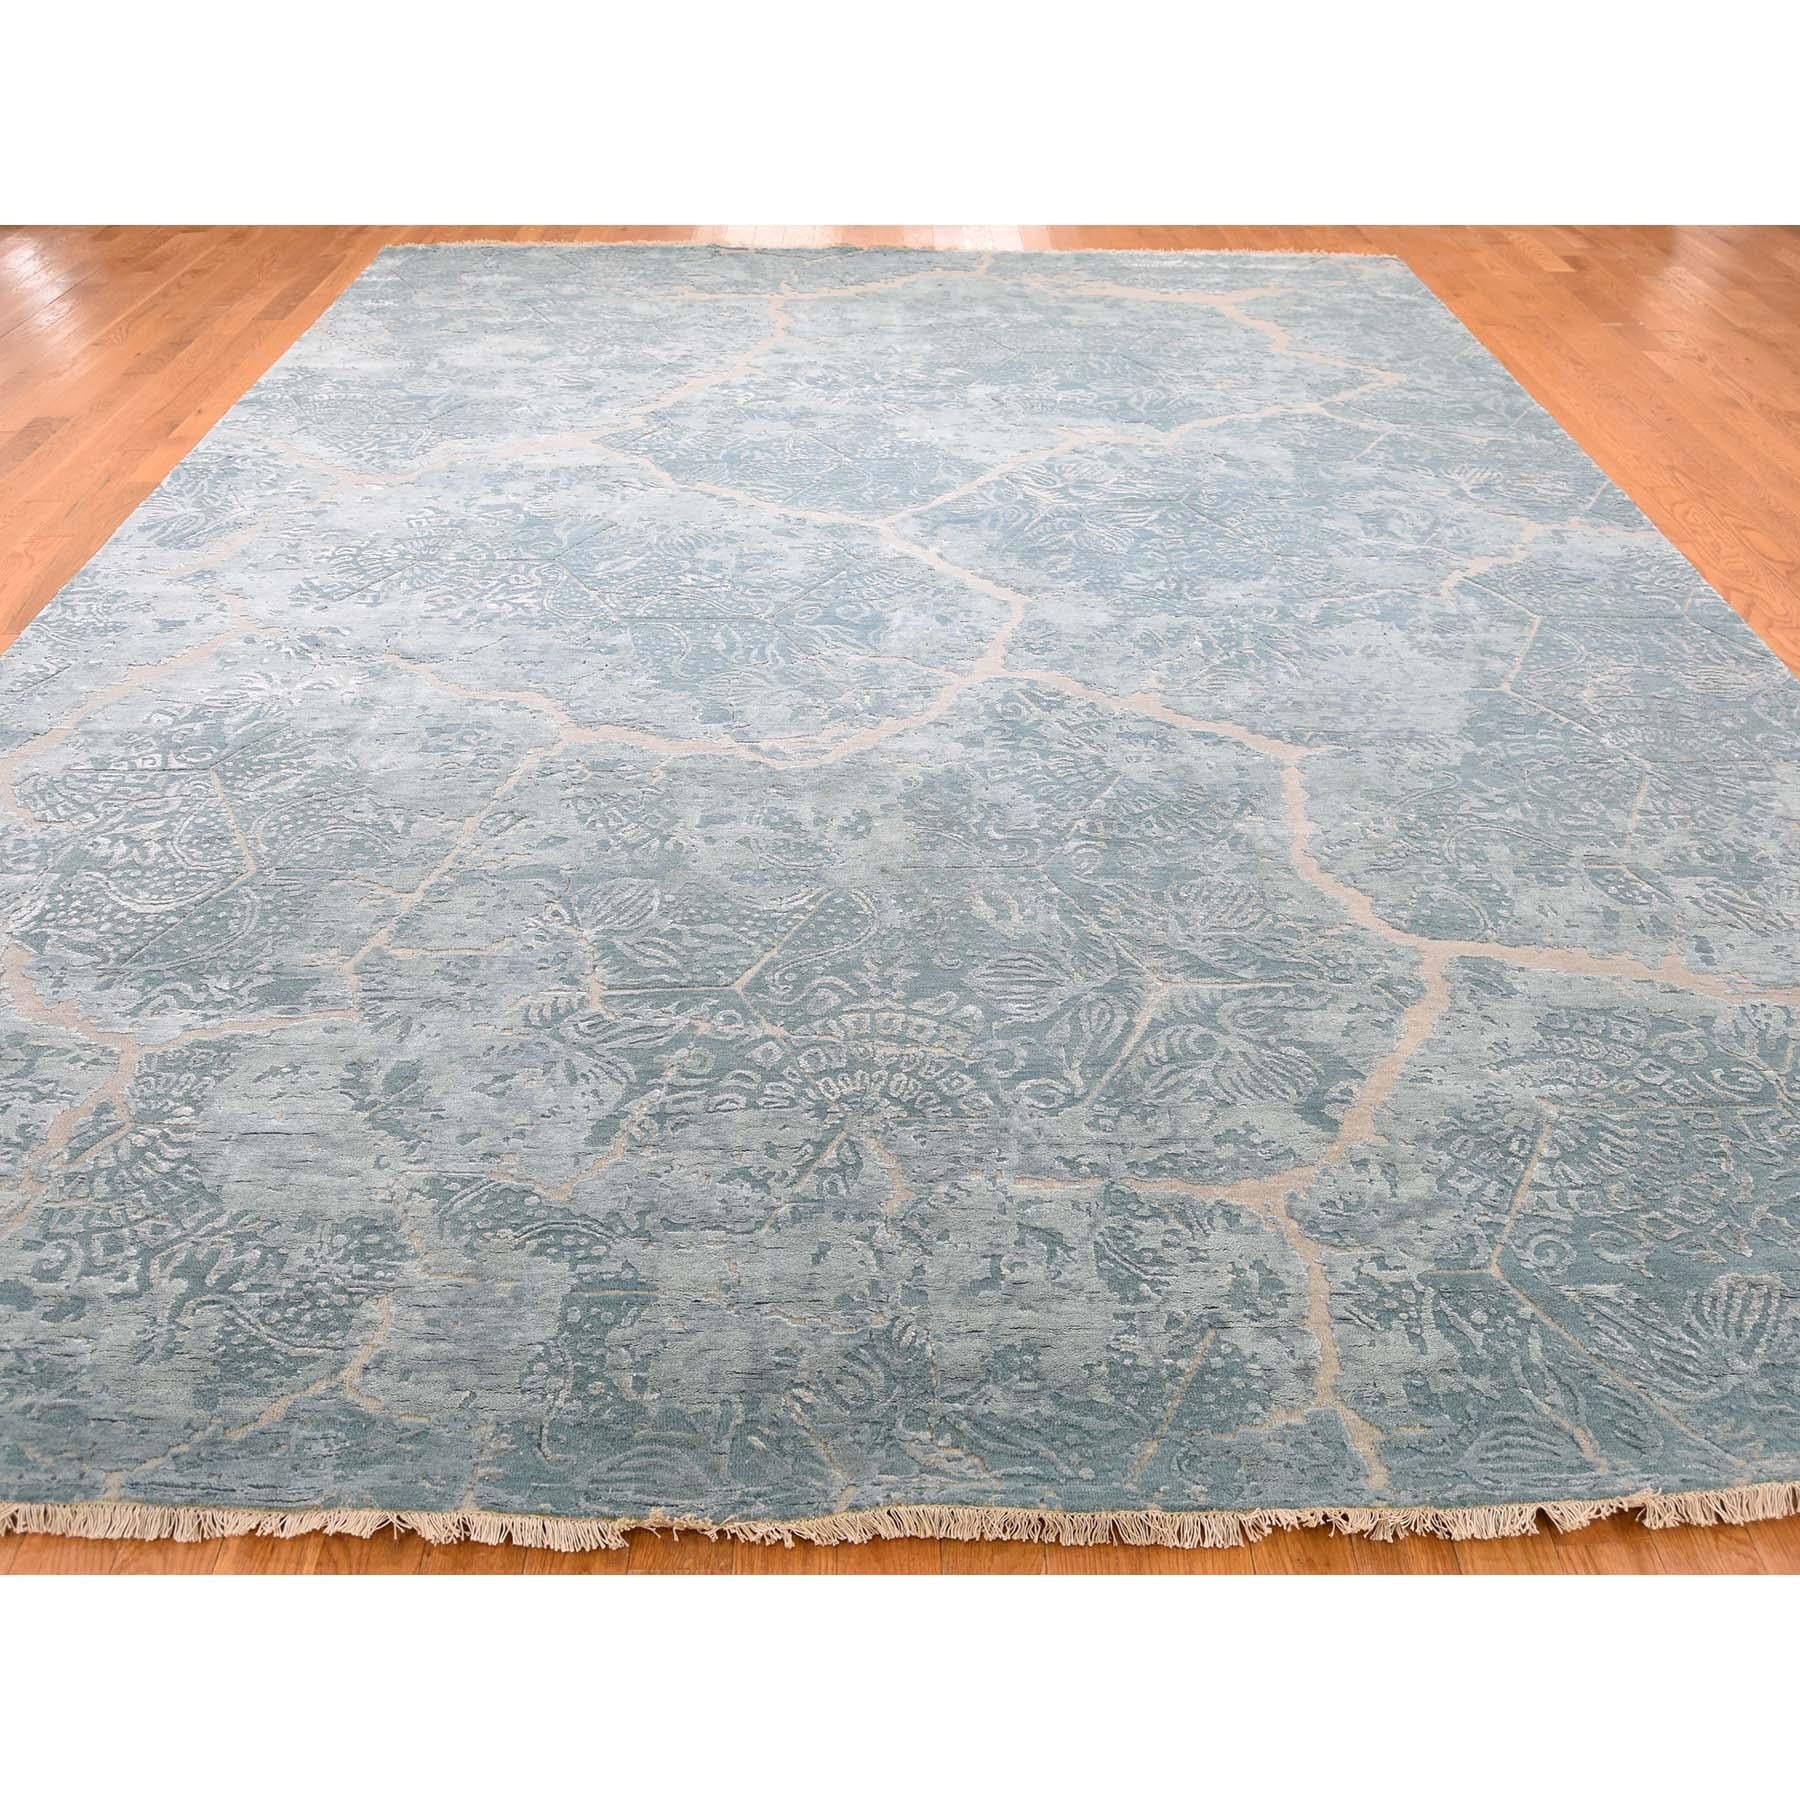 Modern Wool and Silk Hi-Low Pile Hand Knotted Oriental Rug